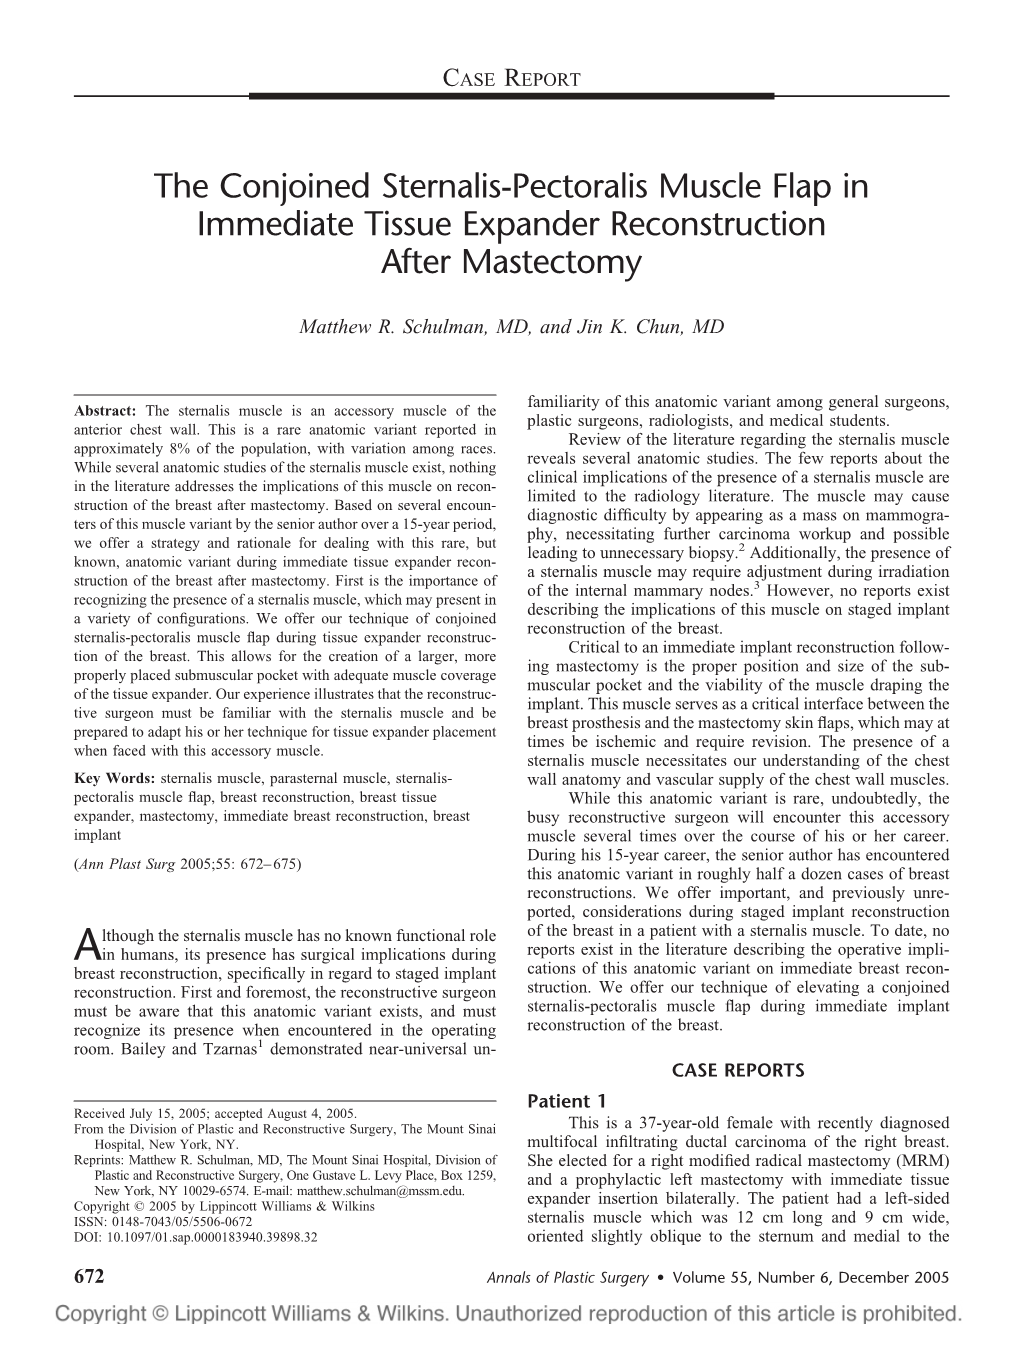 The Conjoined Sternalis-Pectoralis Muscle Flap in Immediate Tissue Expander Reconstruction After Mastectomy